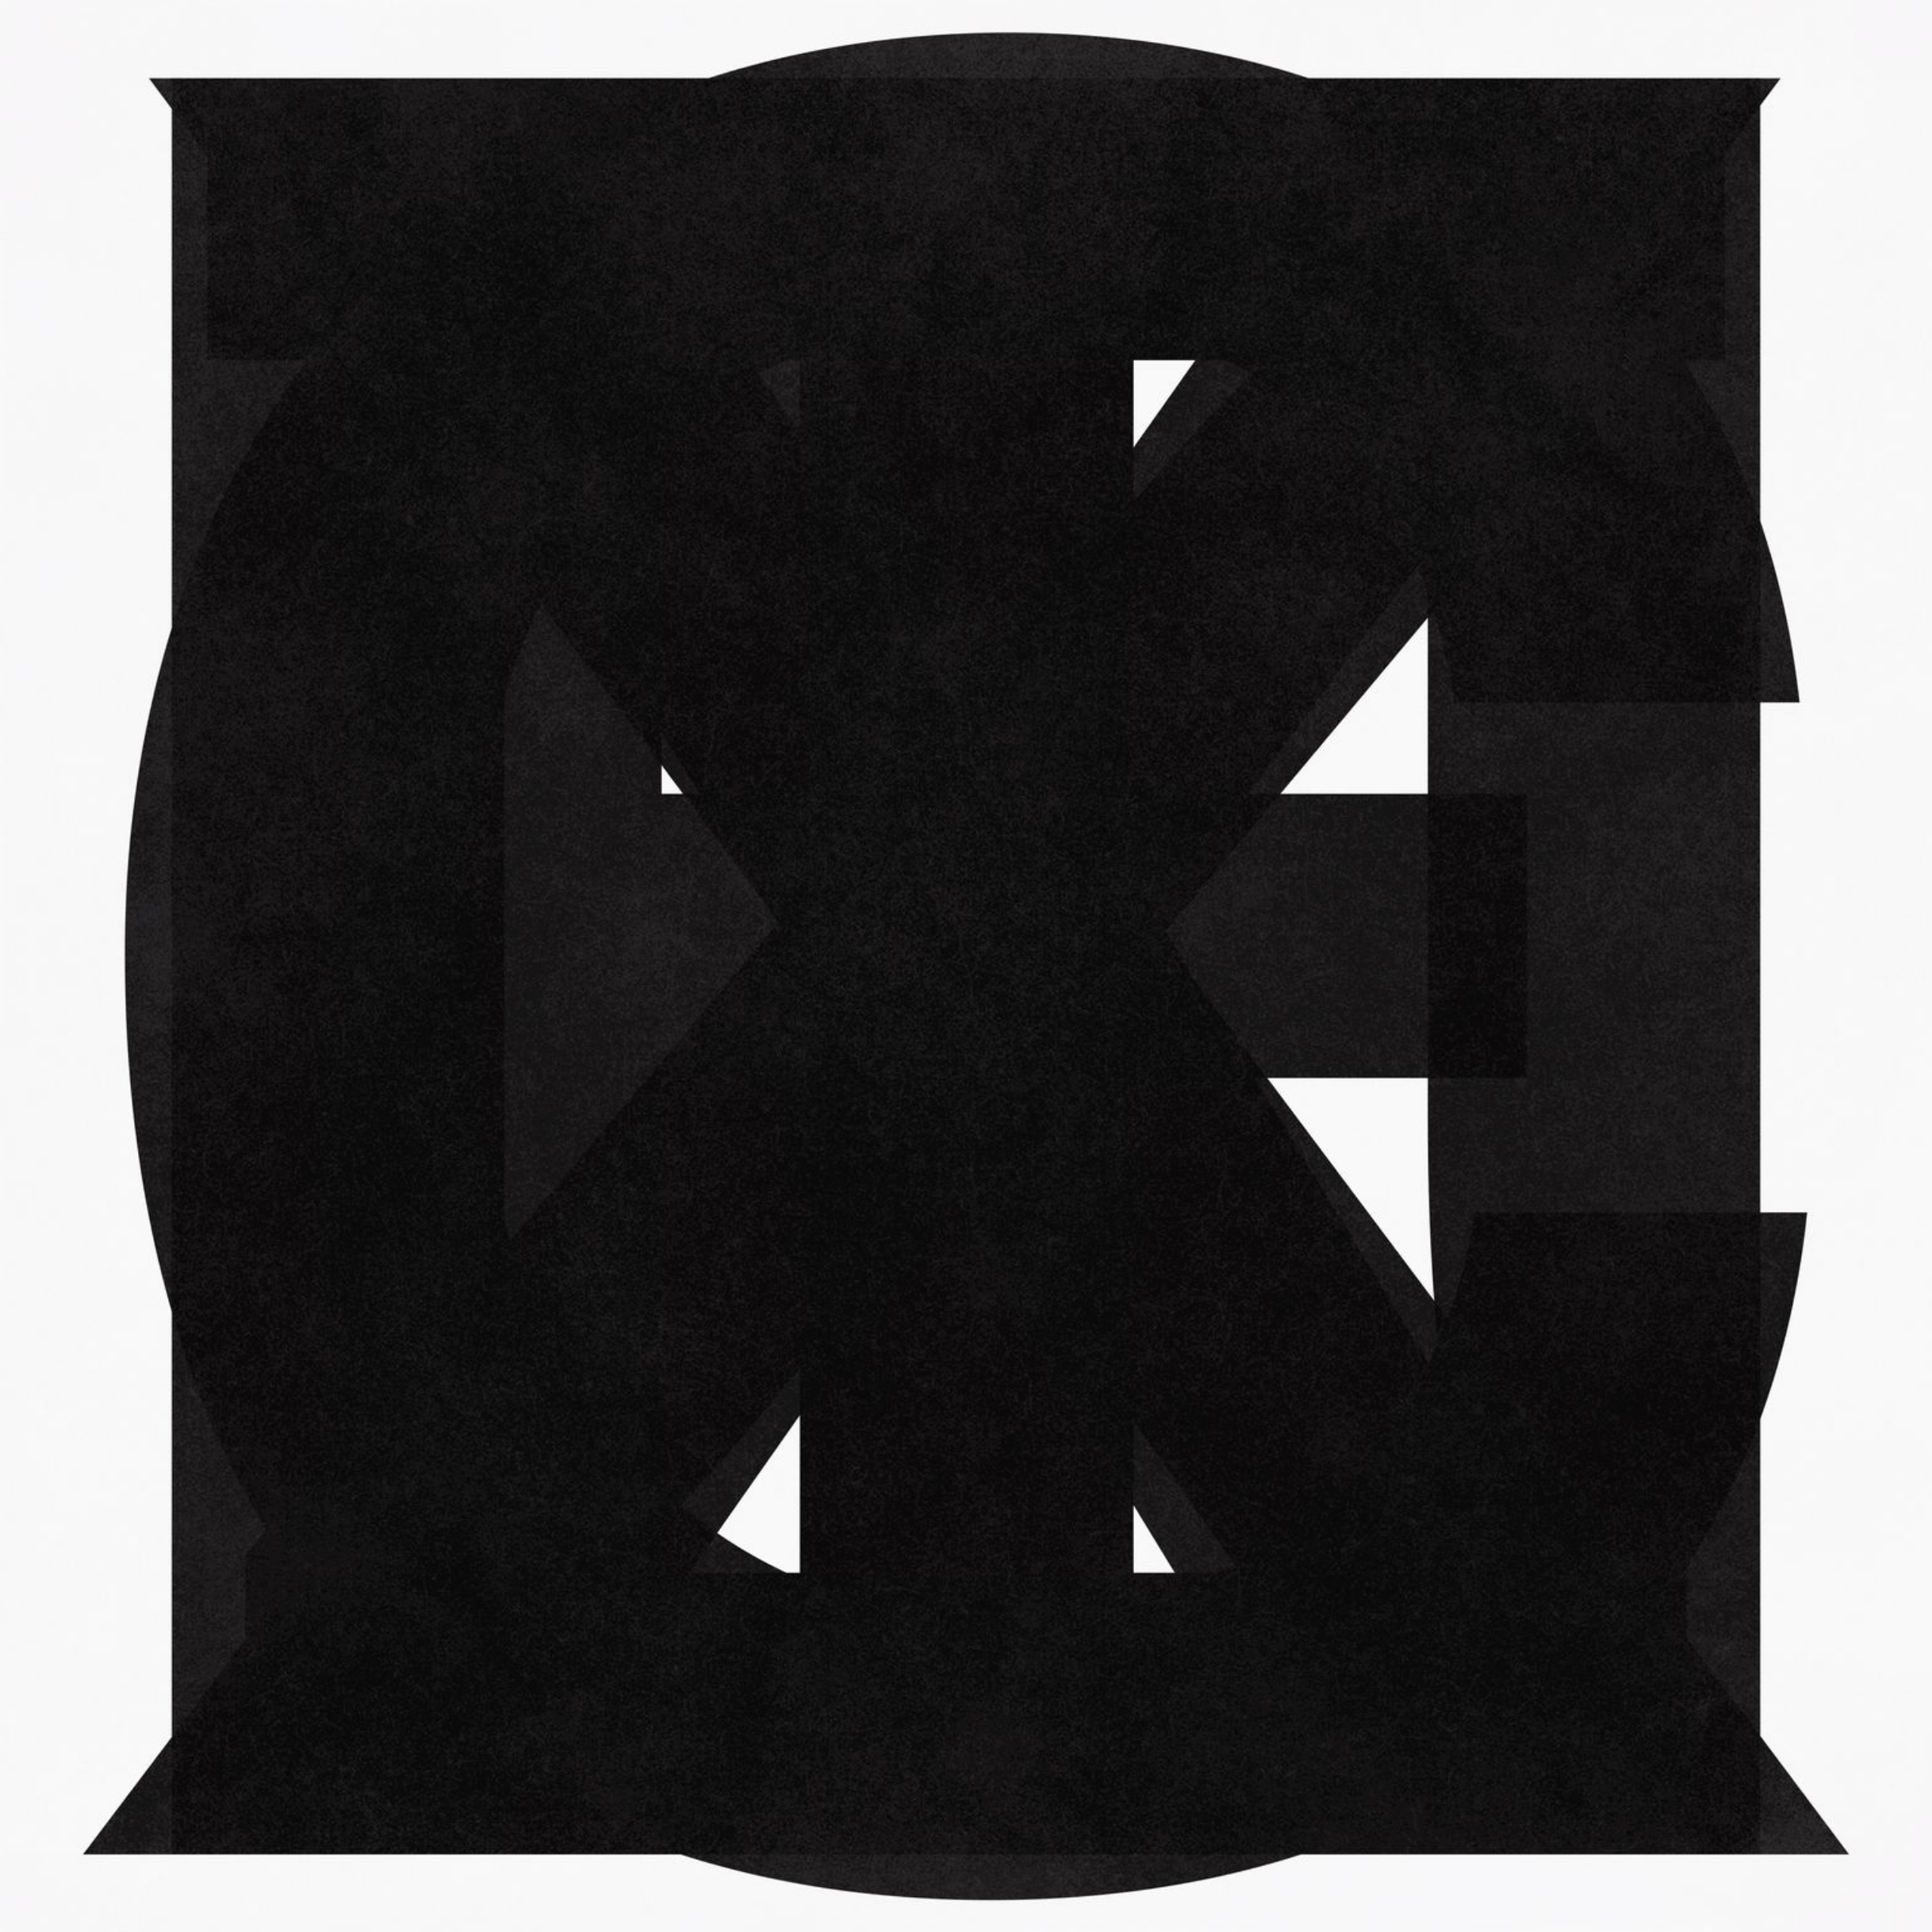 Artwork for the band peels single, Citizen X, Released October 5, 2020. The cover is black and white typography.